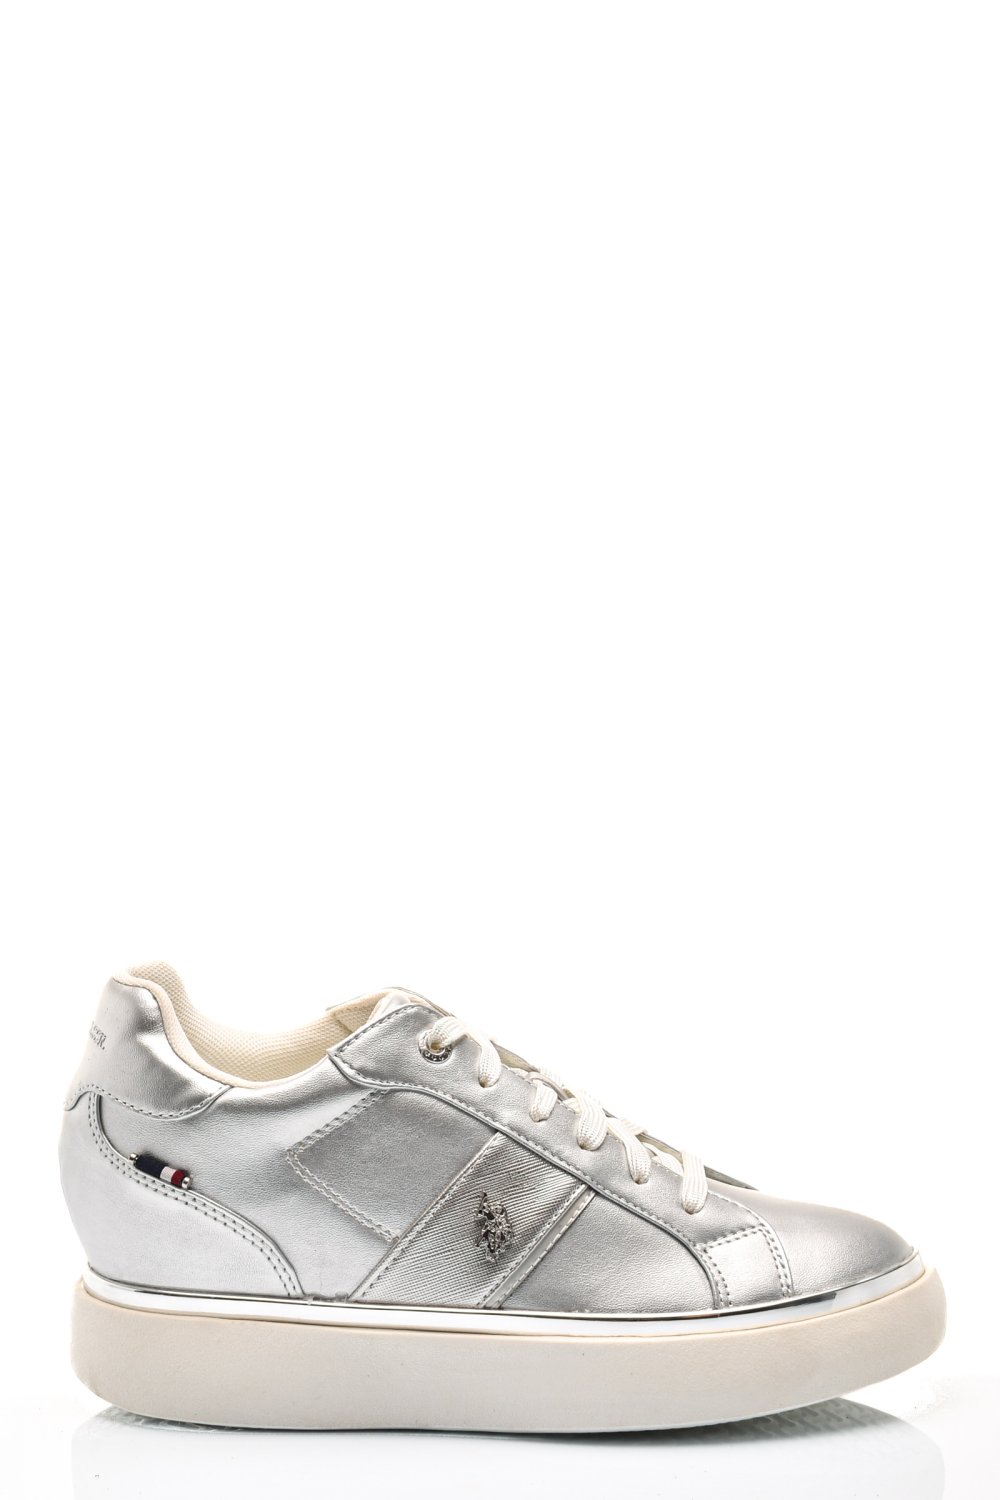 U.S. POLO ASSN, SNEAKERS DAMA SILVER ANGIE001